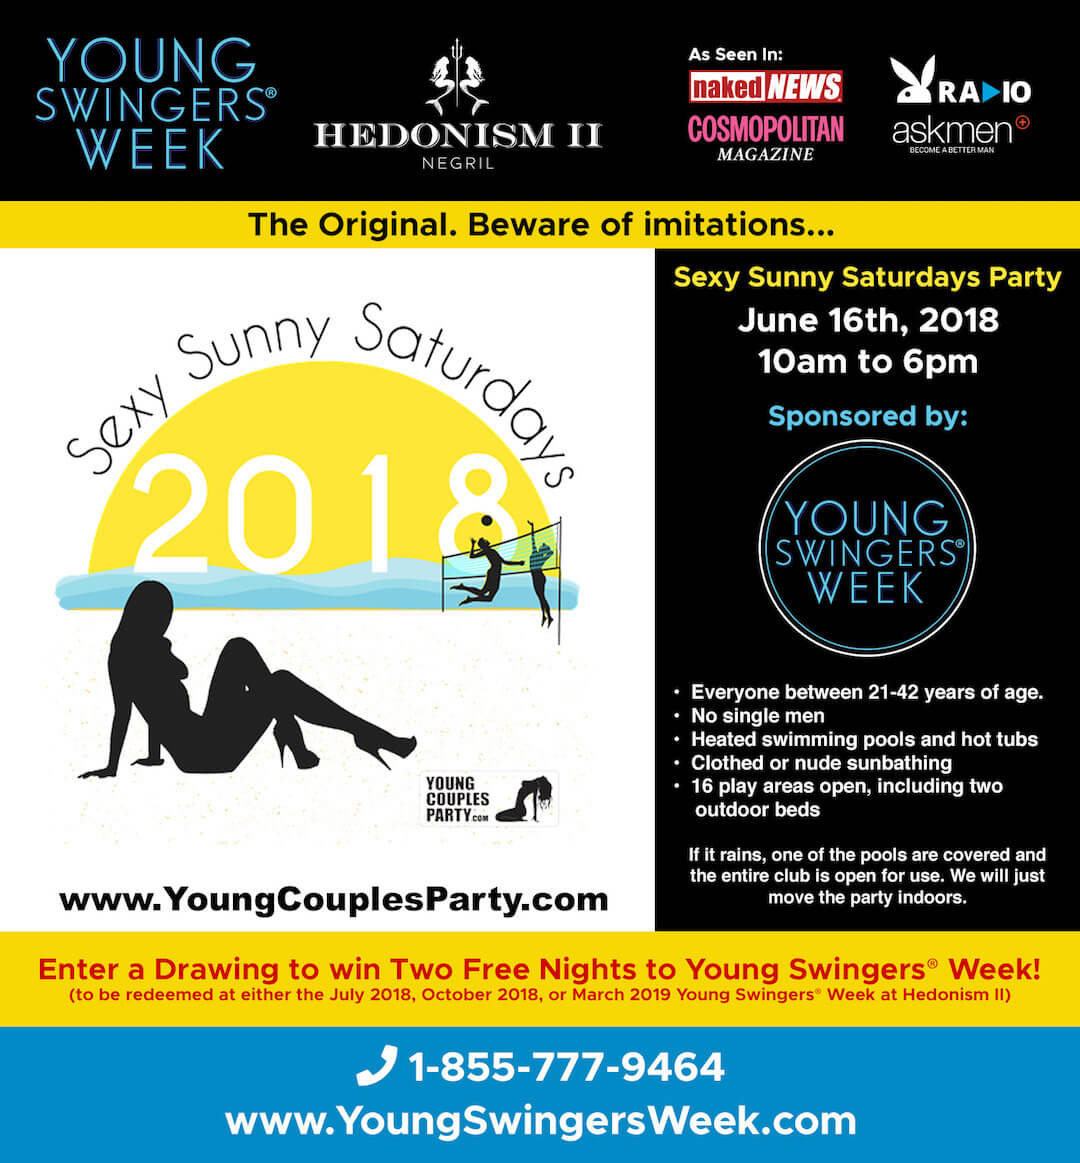 Young Swingers® Sponsored Party for YoungCouplesParty in Chicago, Illinois pic